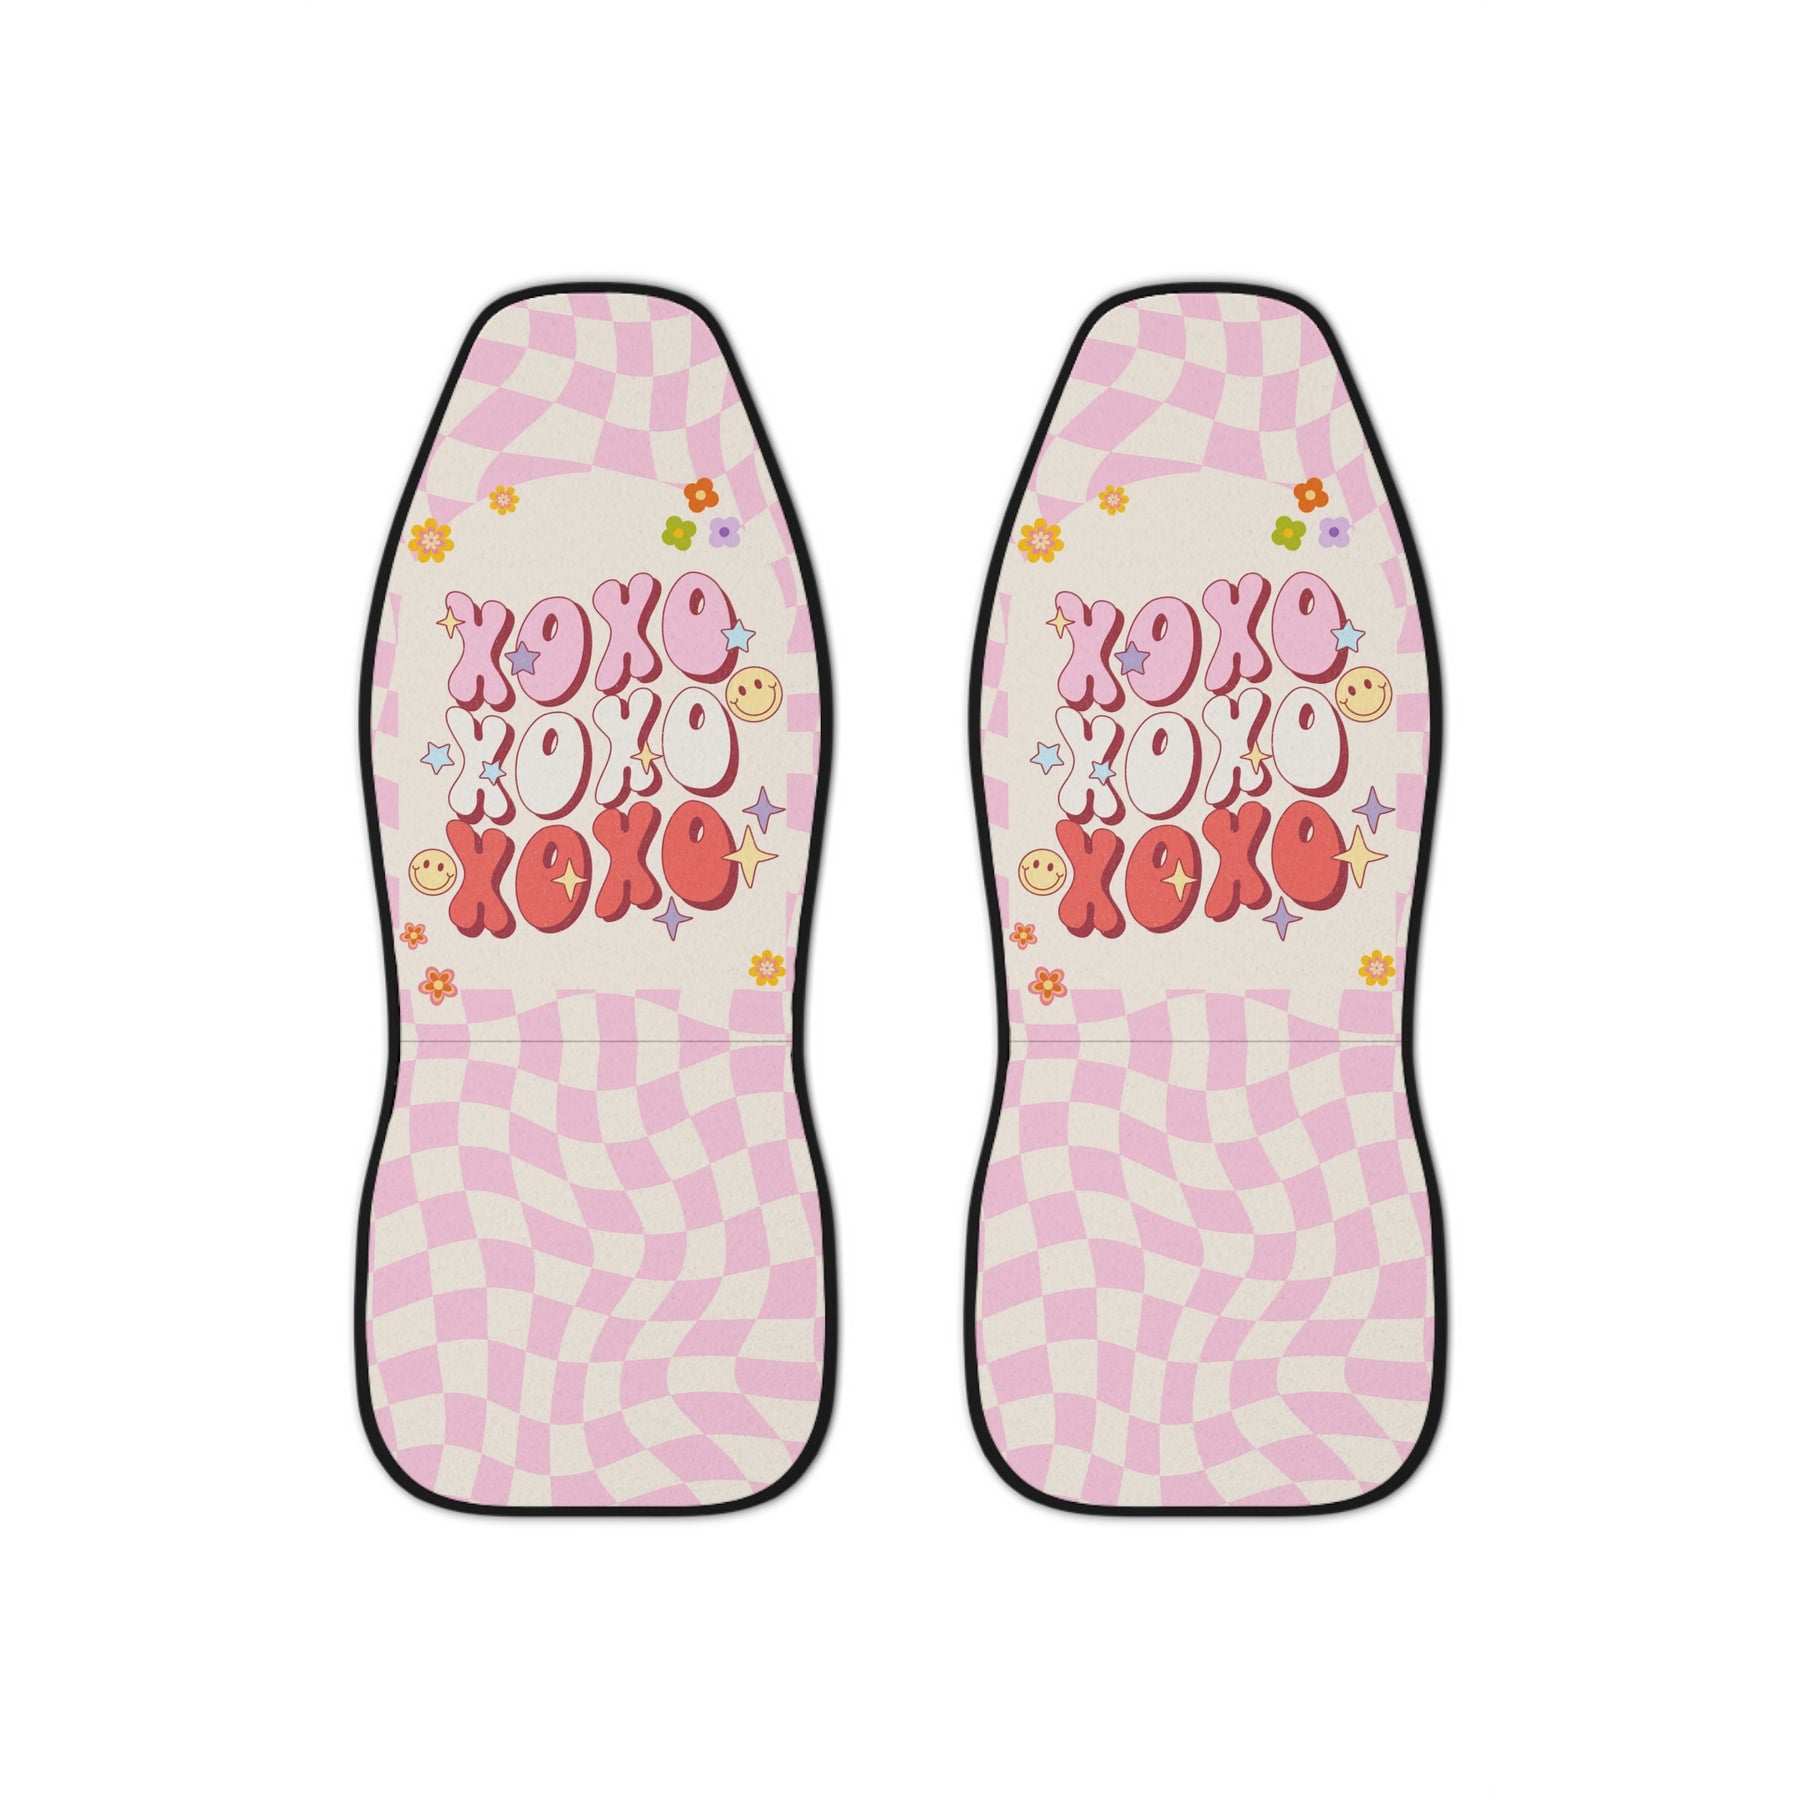 Retro Y2K Car Seat Covers Set, Pink Groovy XOXO Car Seat Cover,Cute Aesthetic Girly Car accessory,Pinky Car Interior Decor,Boho Good Vibe